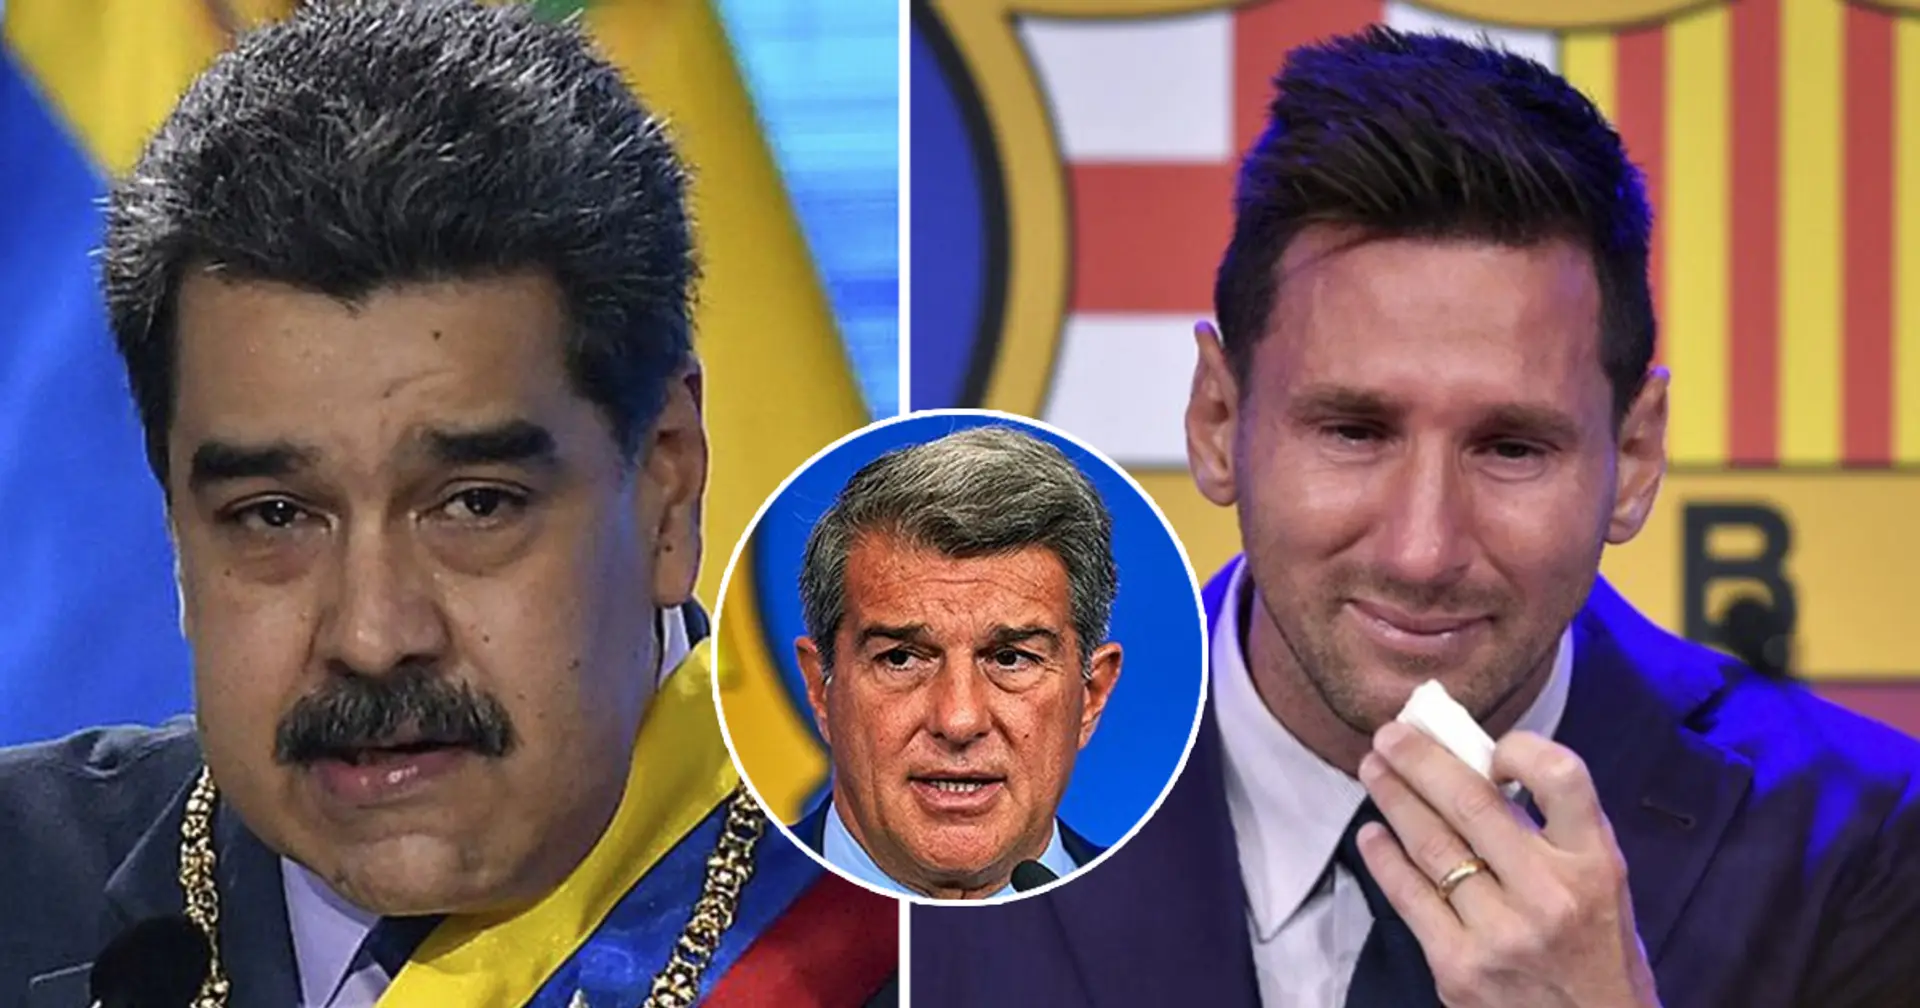 'How ugly! They used him and they kicked him': Venezuela president reacts to Messi's Barca exit